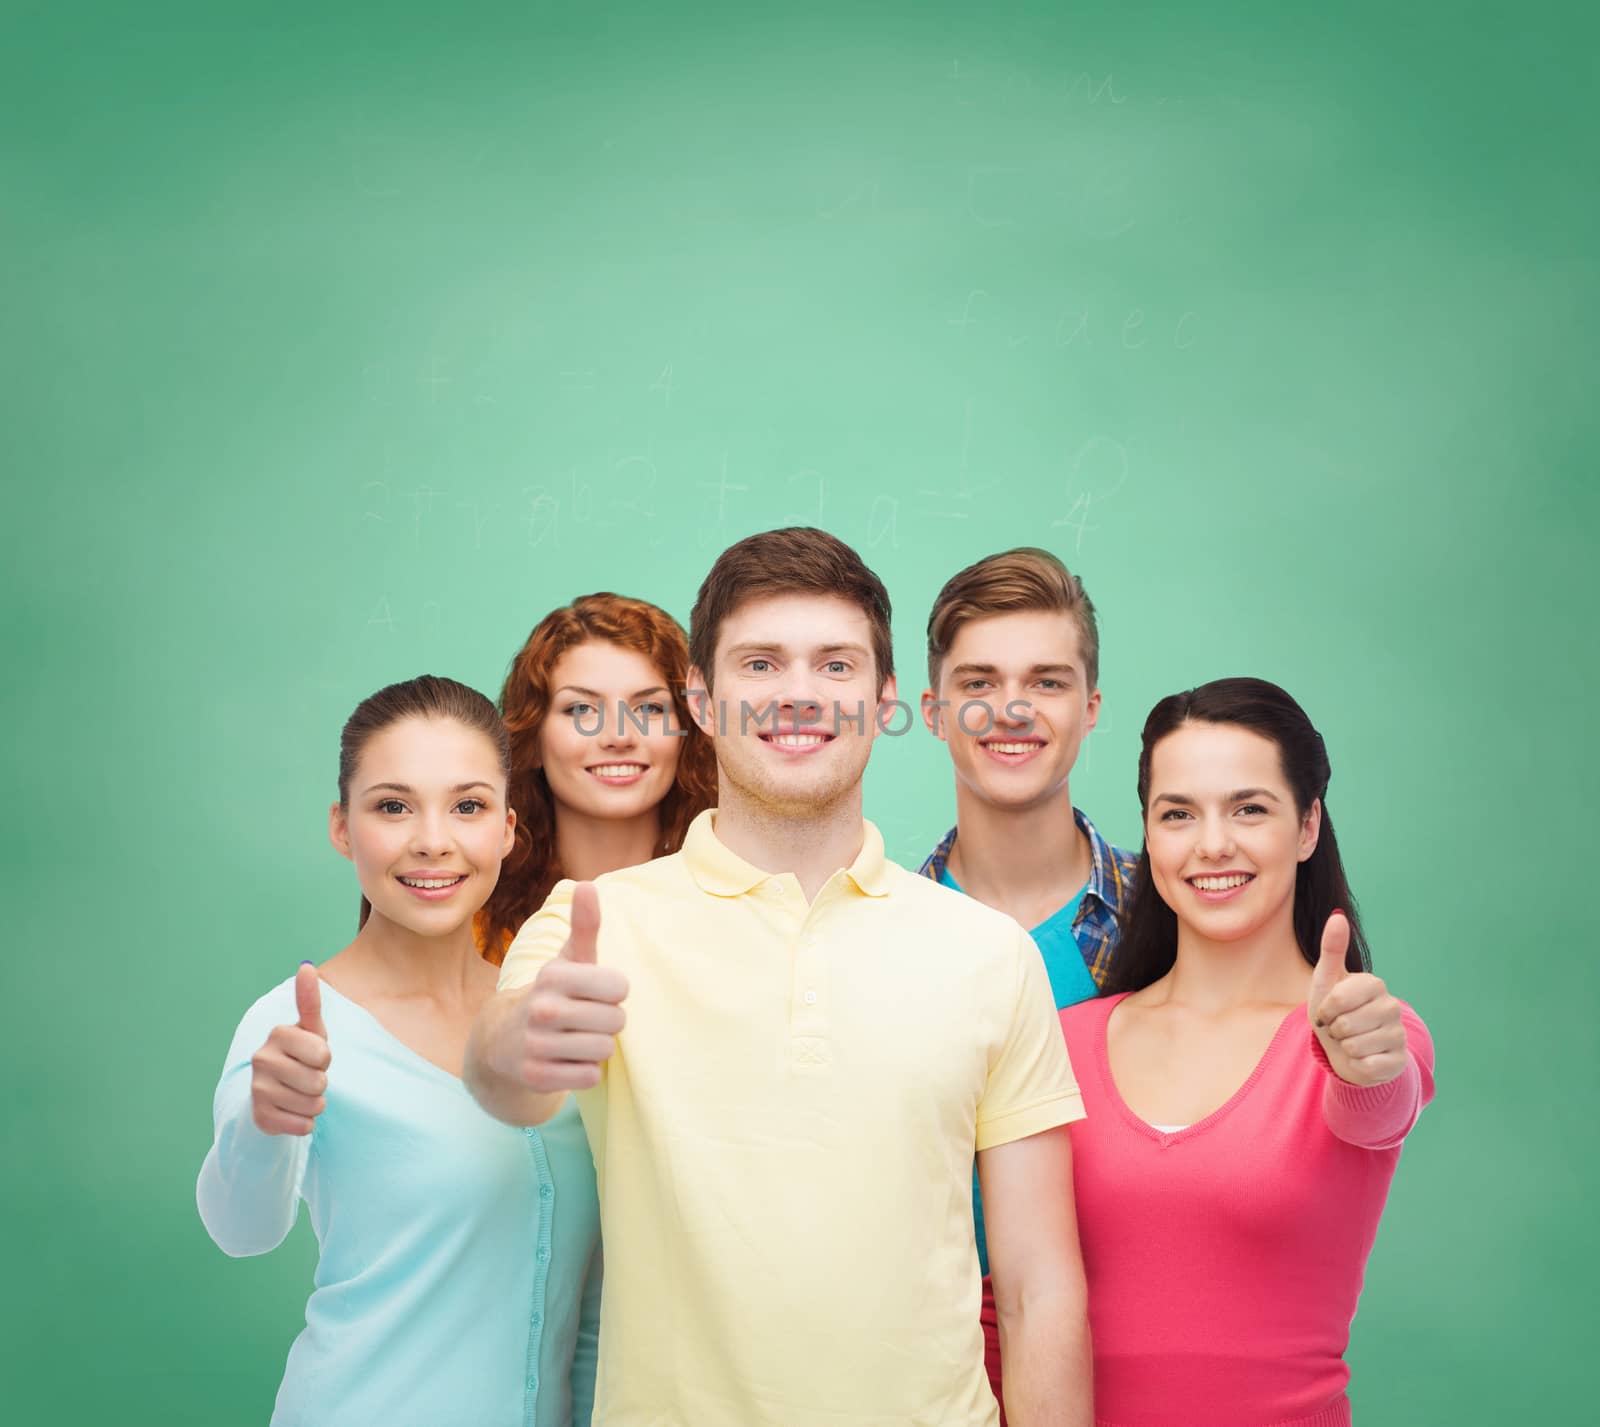 group of smiling teenagers over green board by dolgachov